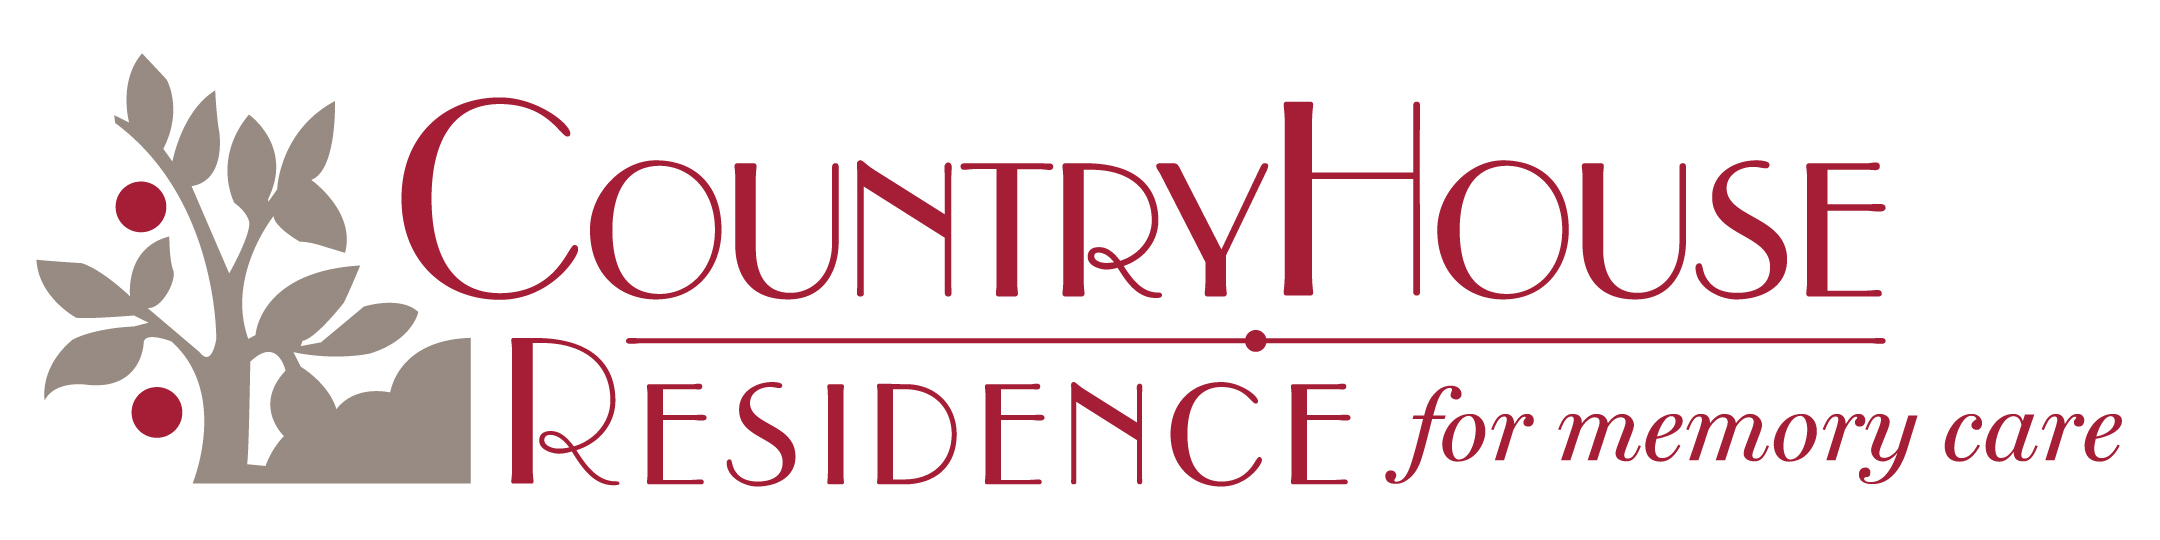 Country House logo